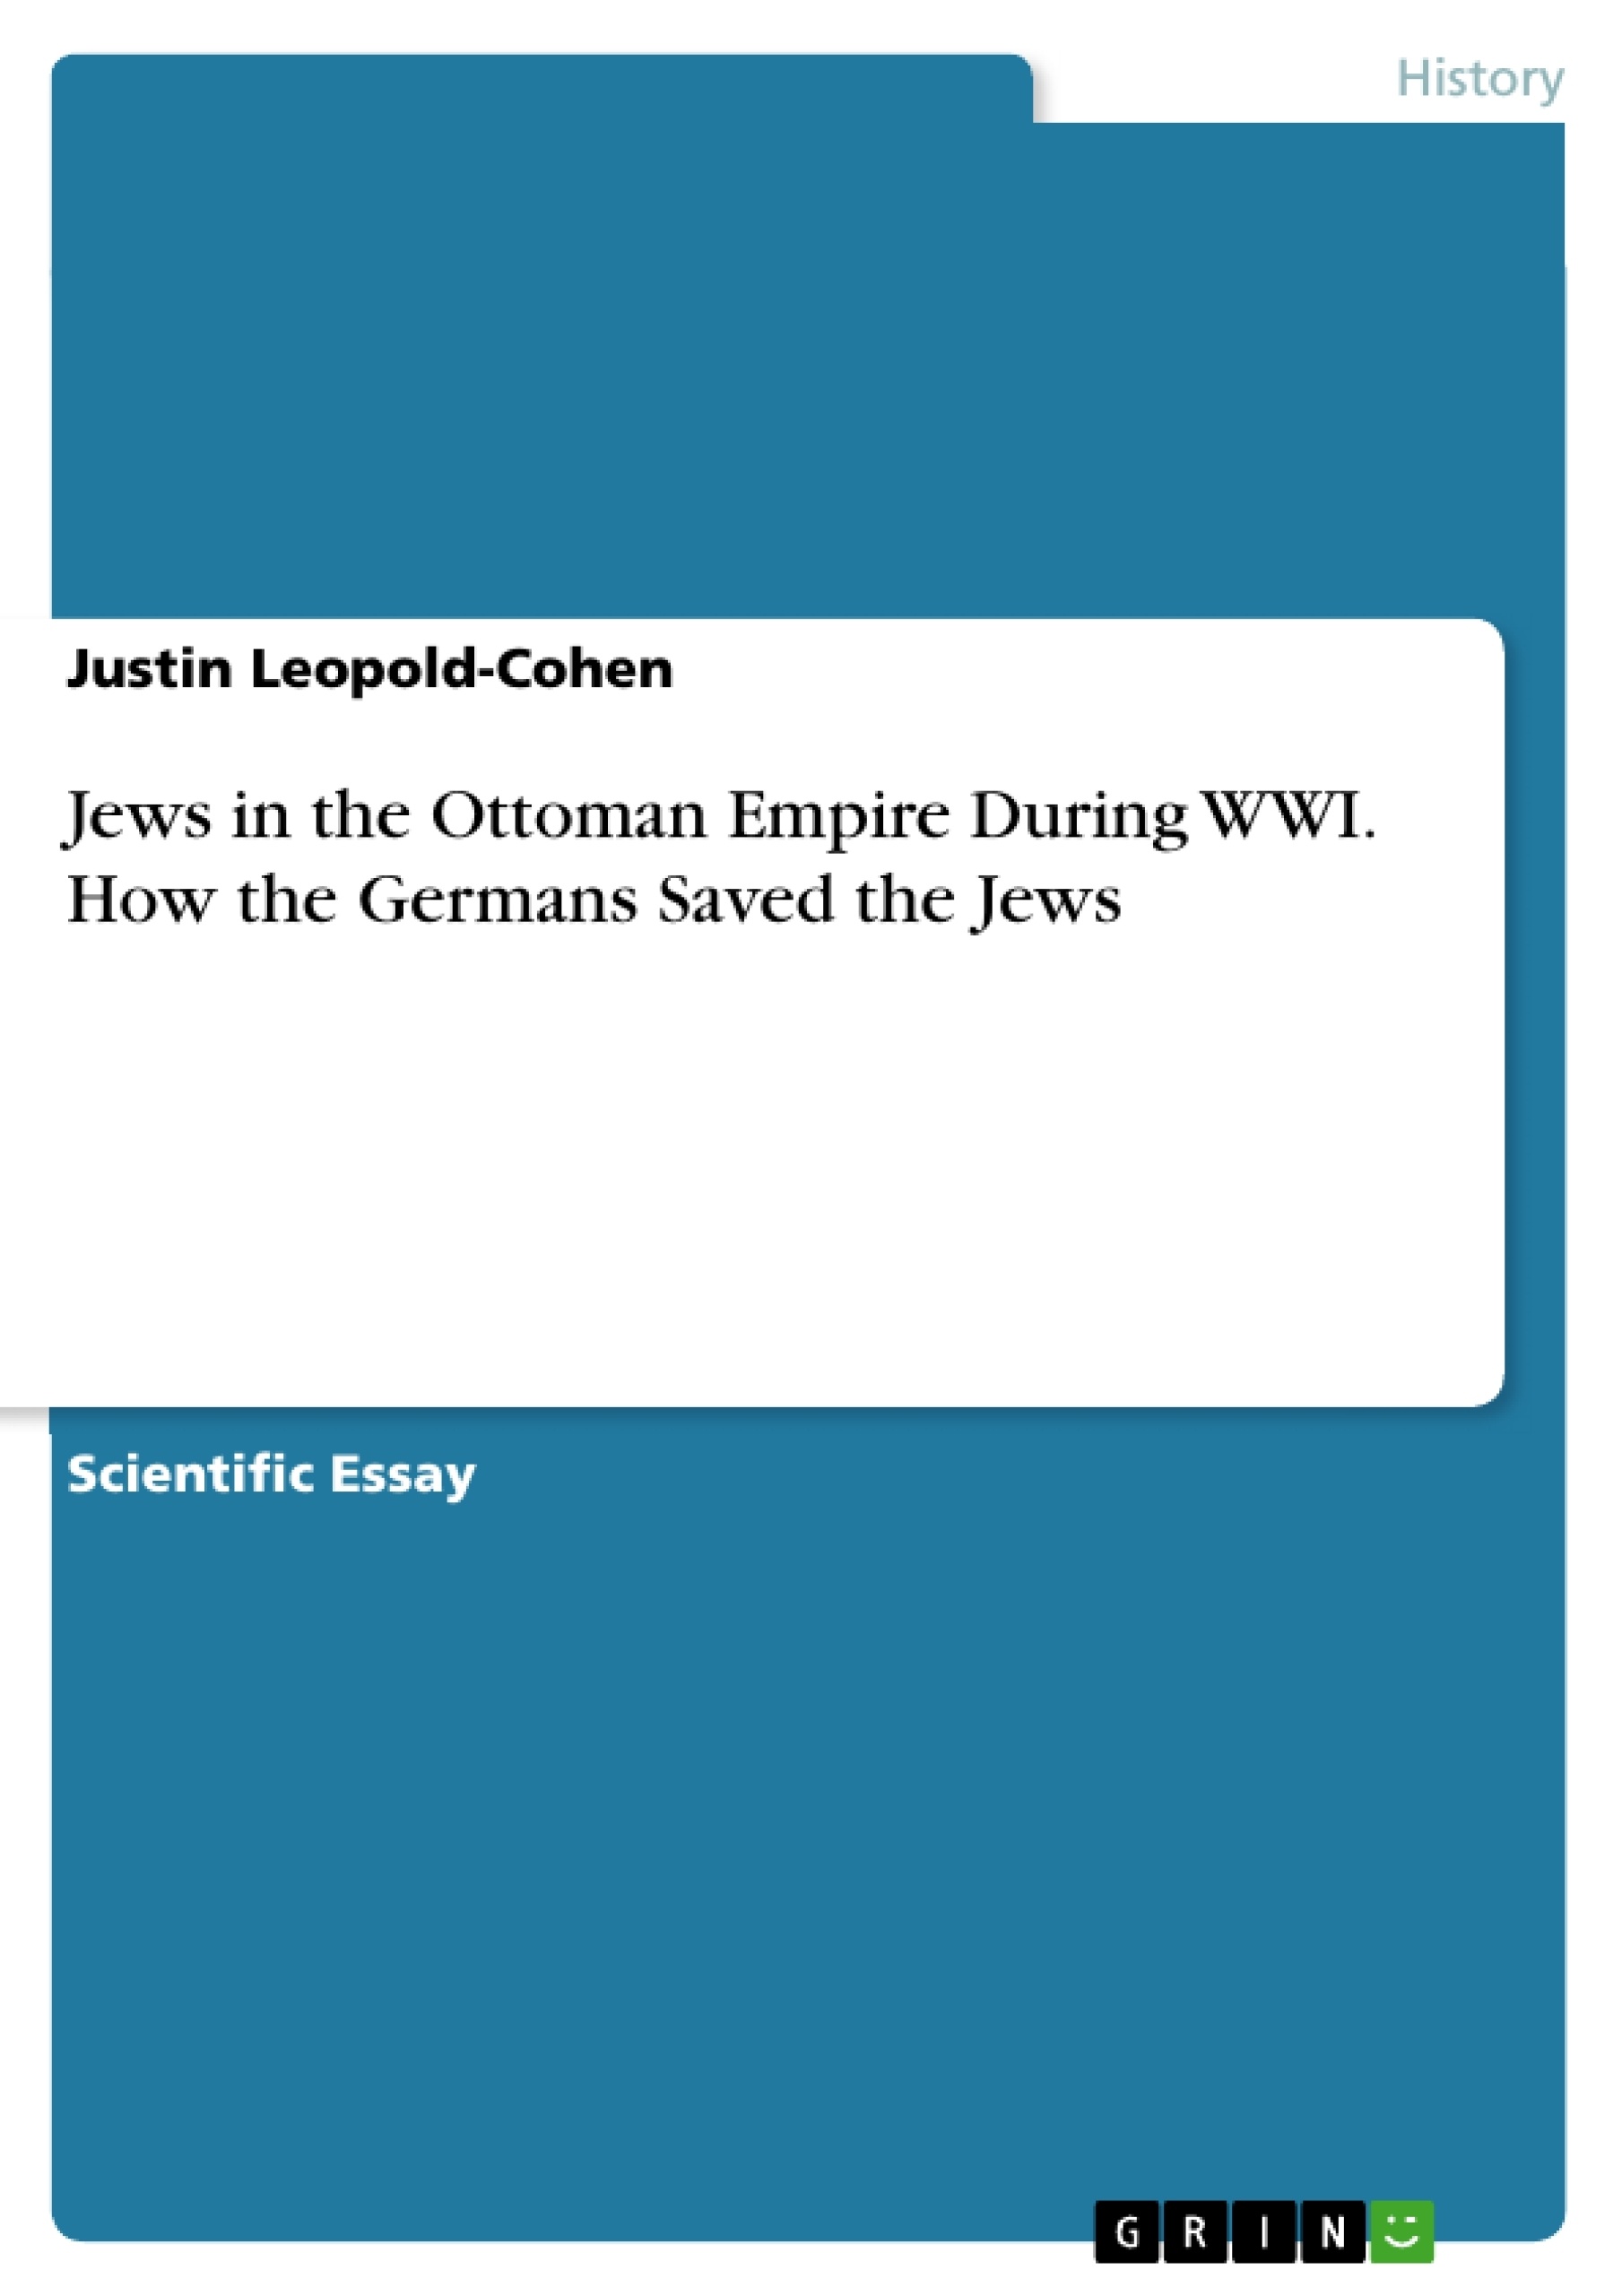 Title: Jews in the Ottoman Empire During WWI. How the Germans Saved the Jews